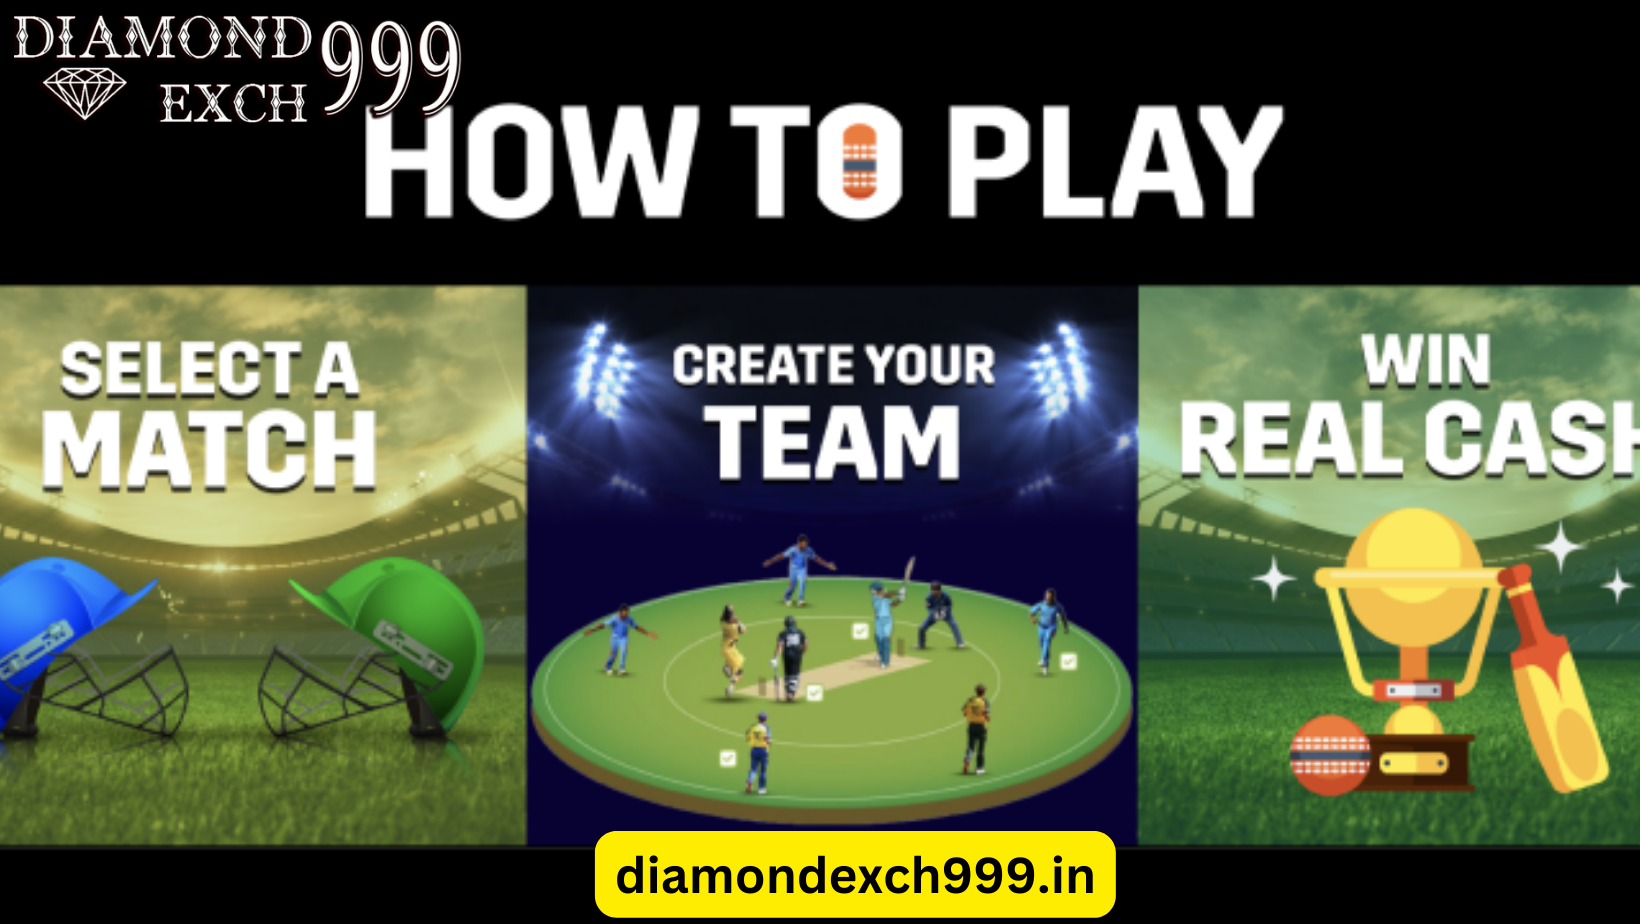 Diamond exch : Play Fantasy cricket games and win real cash with Diamondexch999